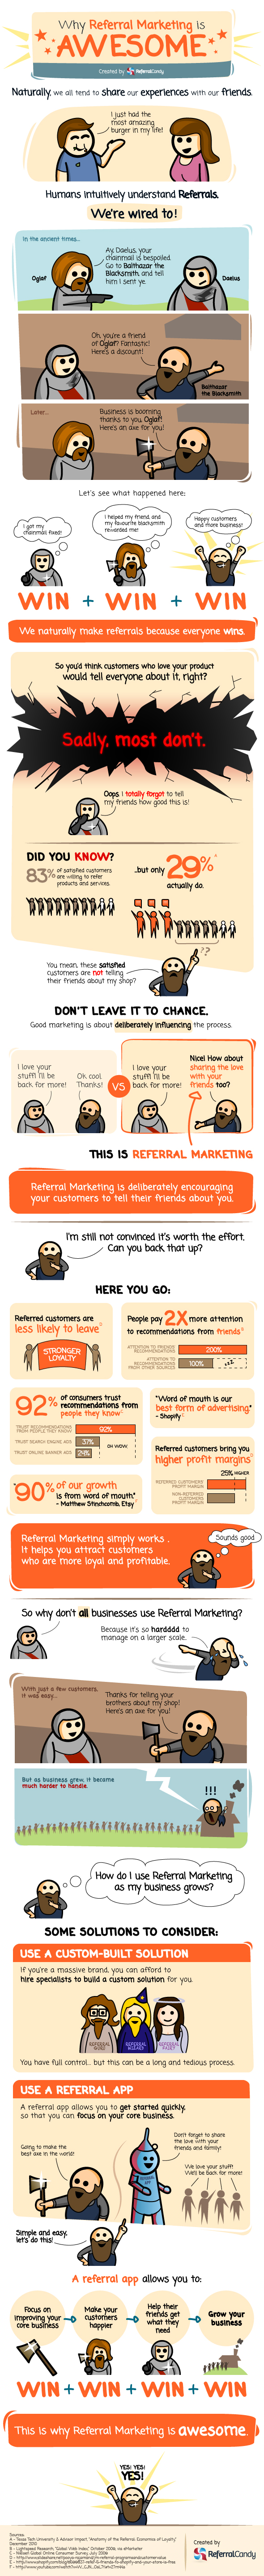 Why Referral Marketing is Awesome